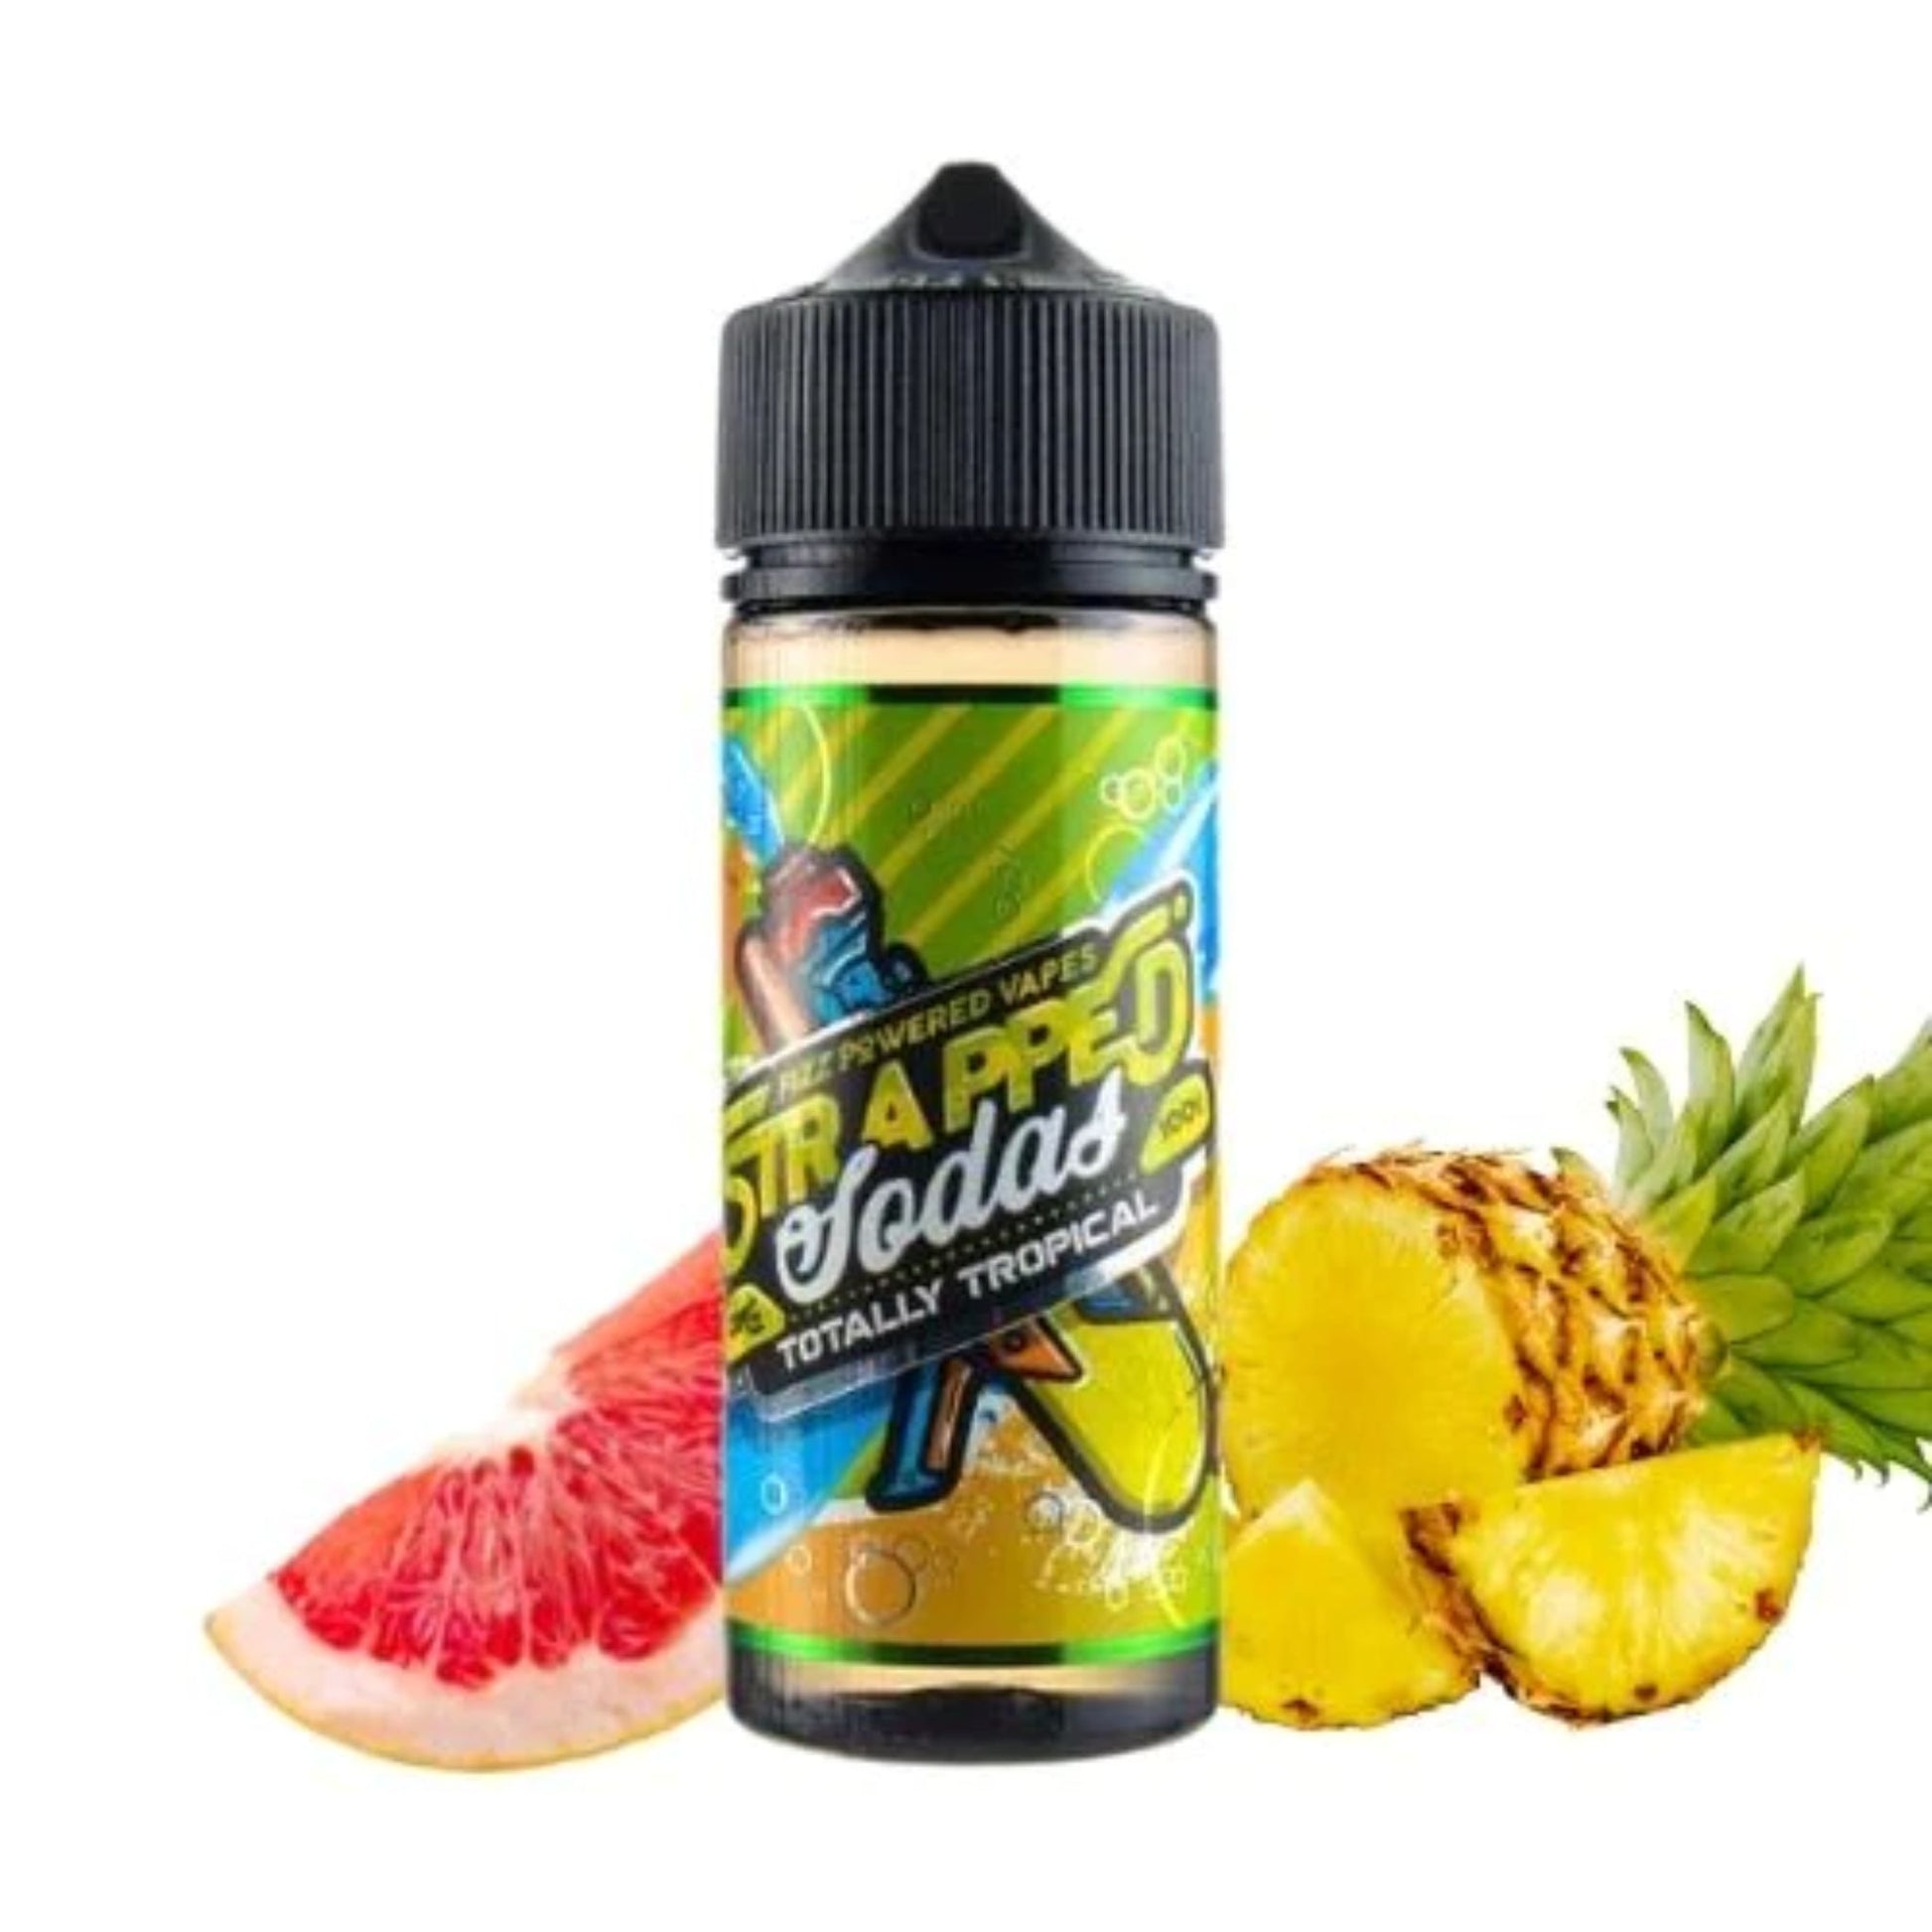 Strapped Sodas | Totally Tropical | 100ml bottle with sliced grapefruit and sliced up pineapple